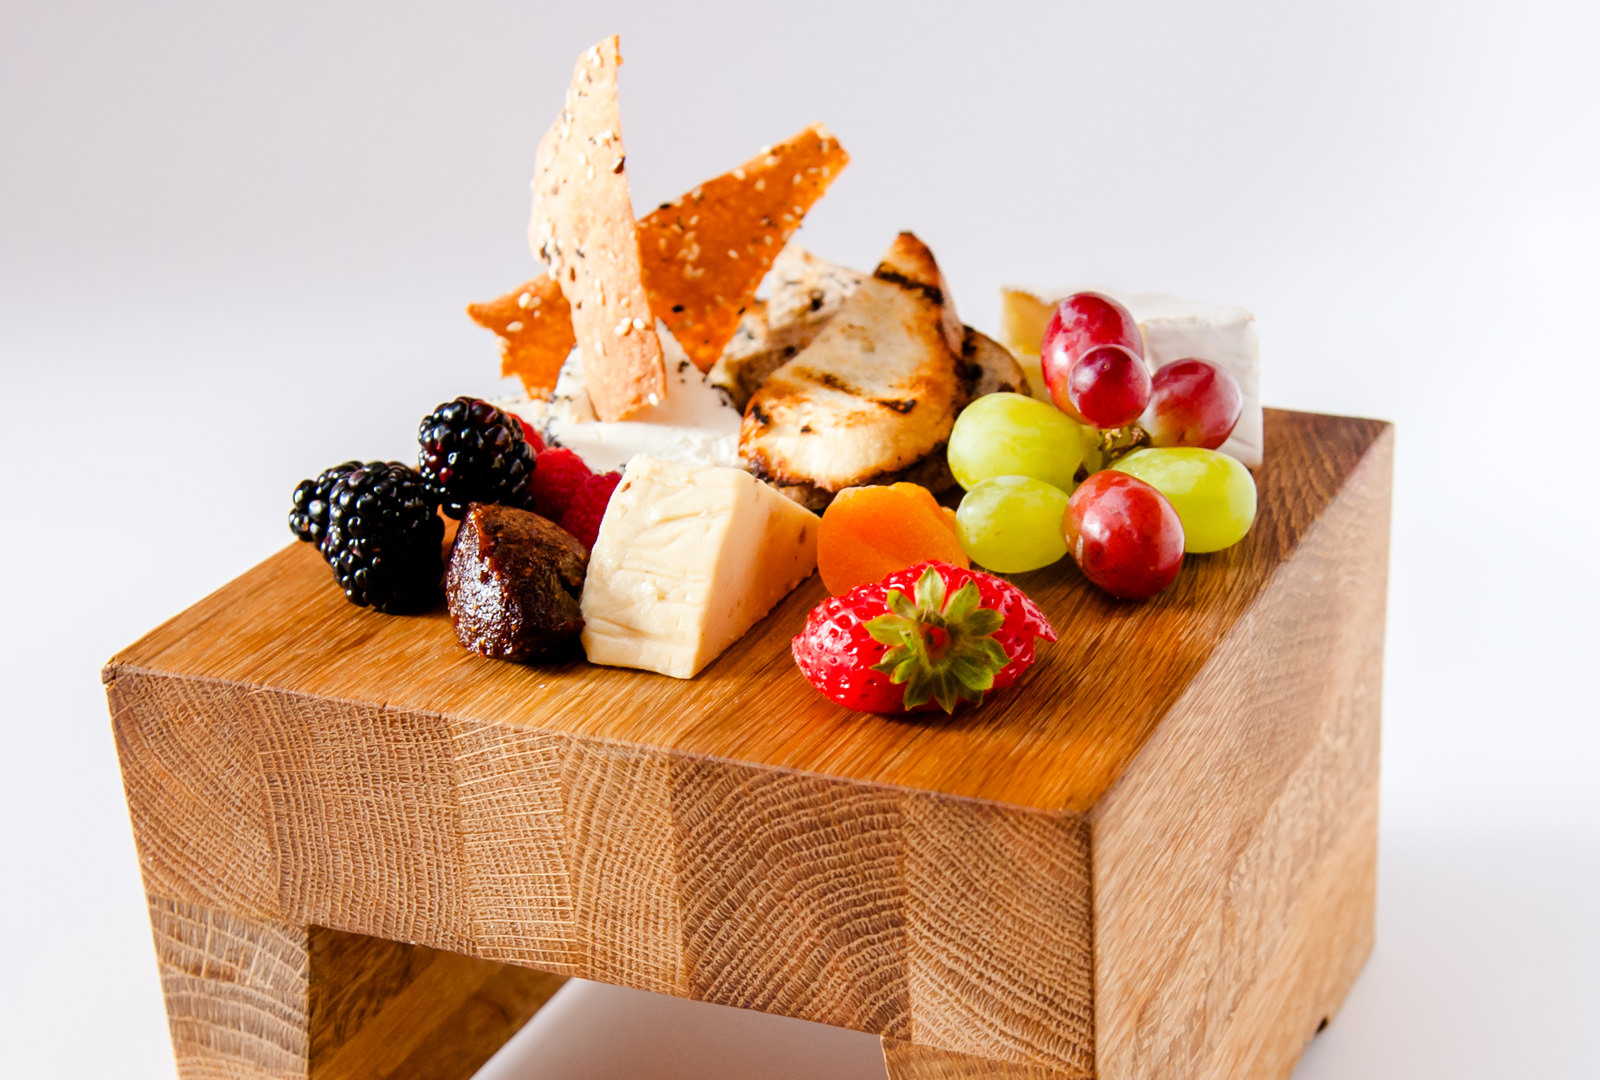 Artisanal Cheeses Platter Containing Local and International Cheeses Along With Fresh Fruit